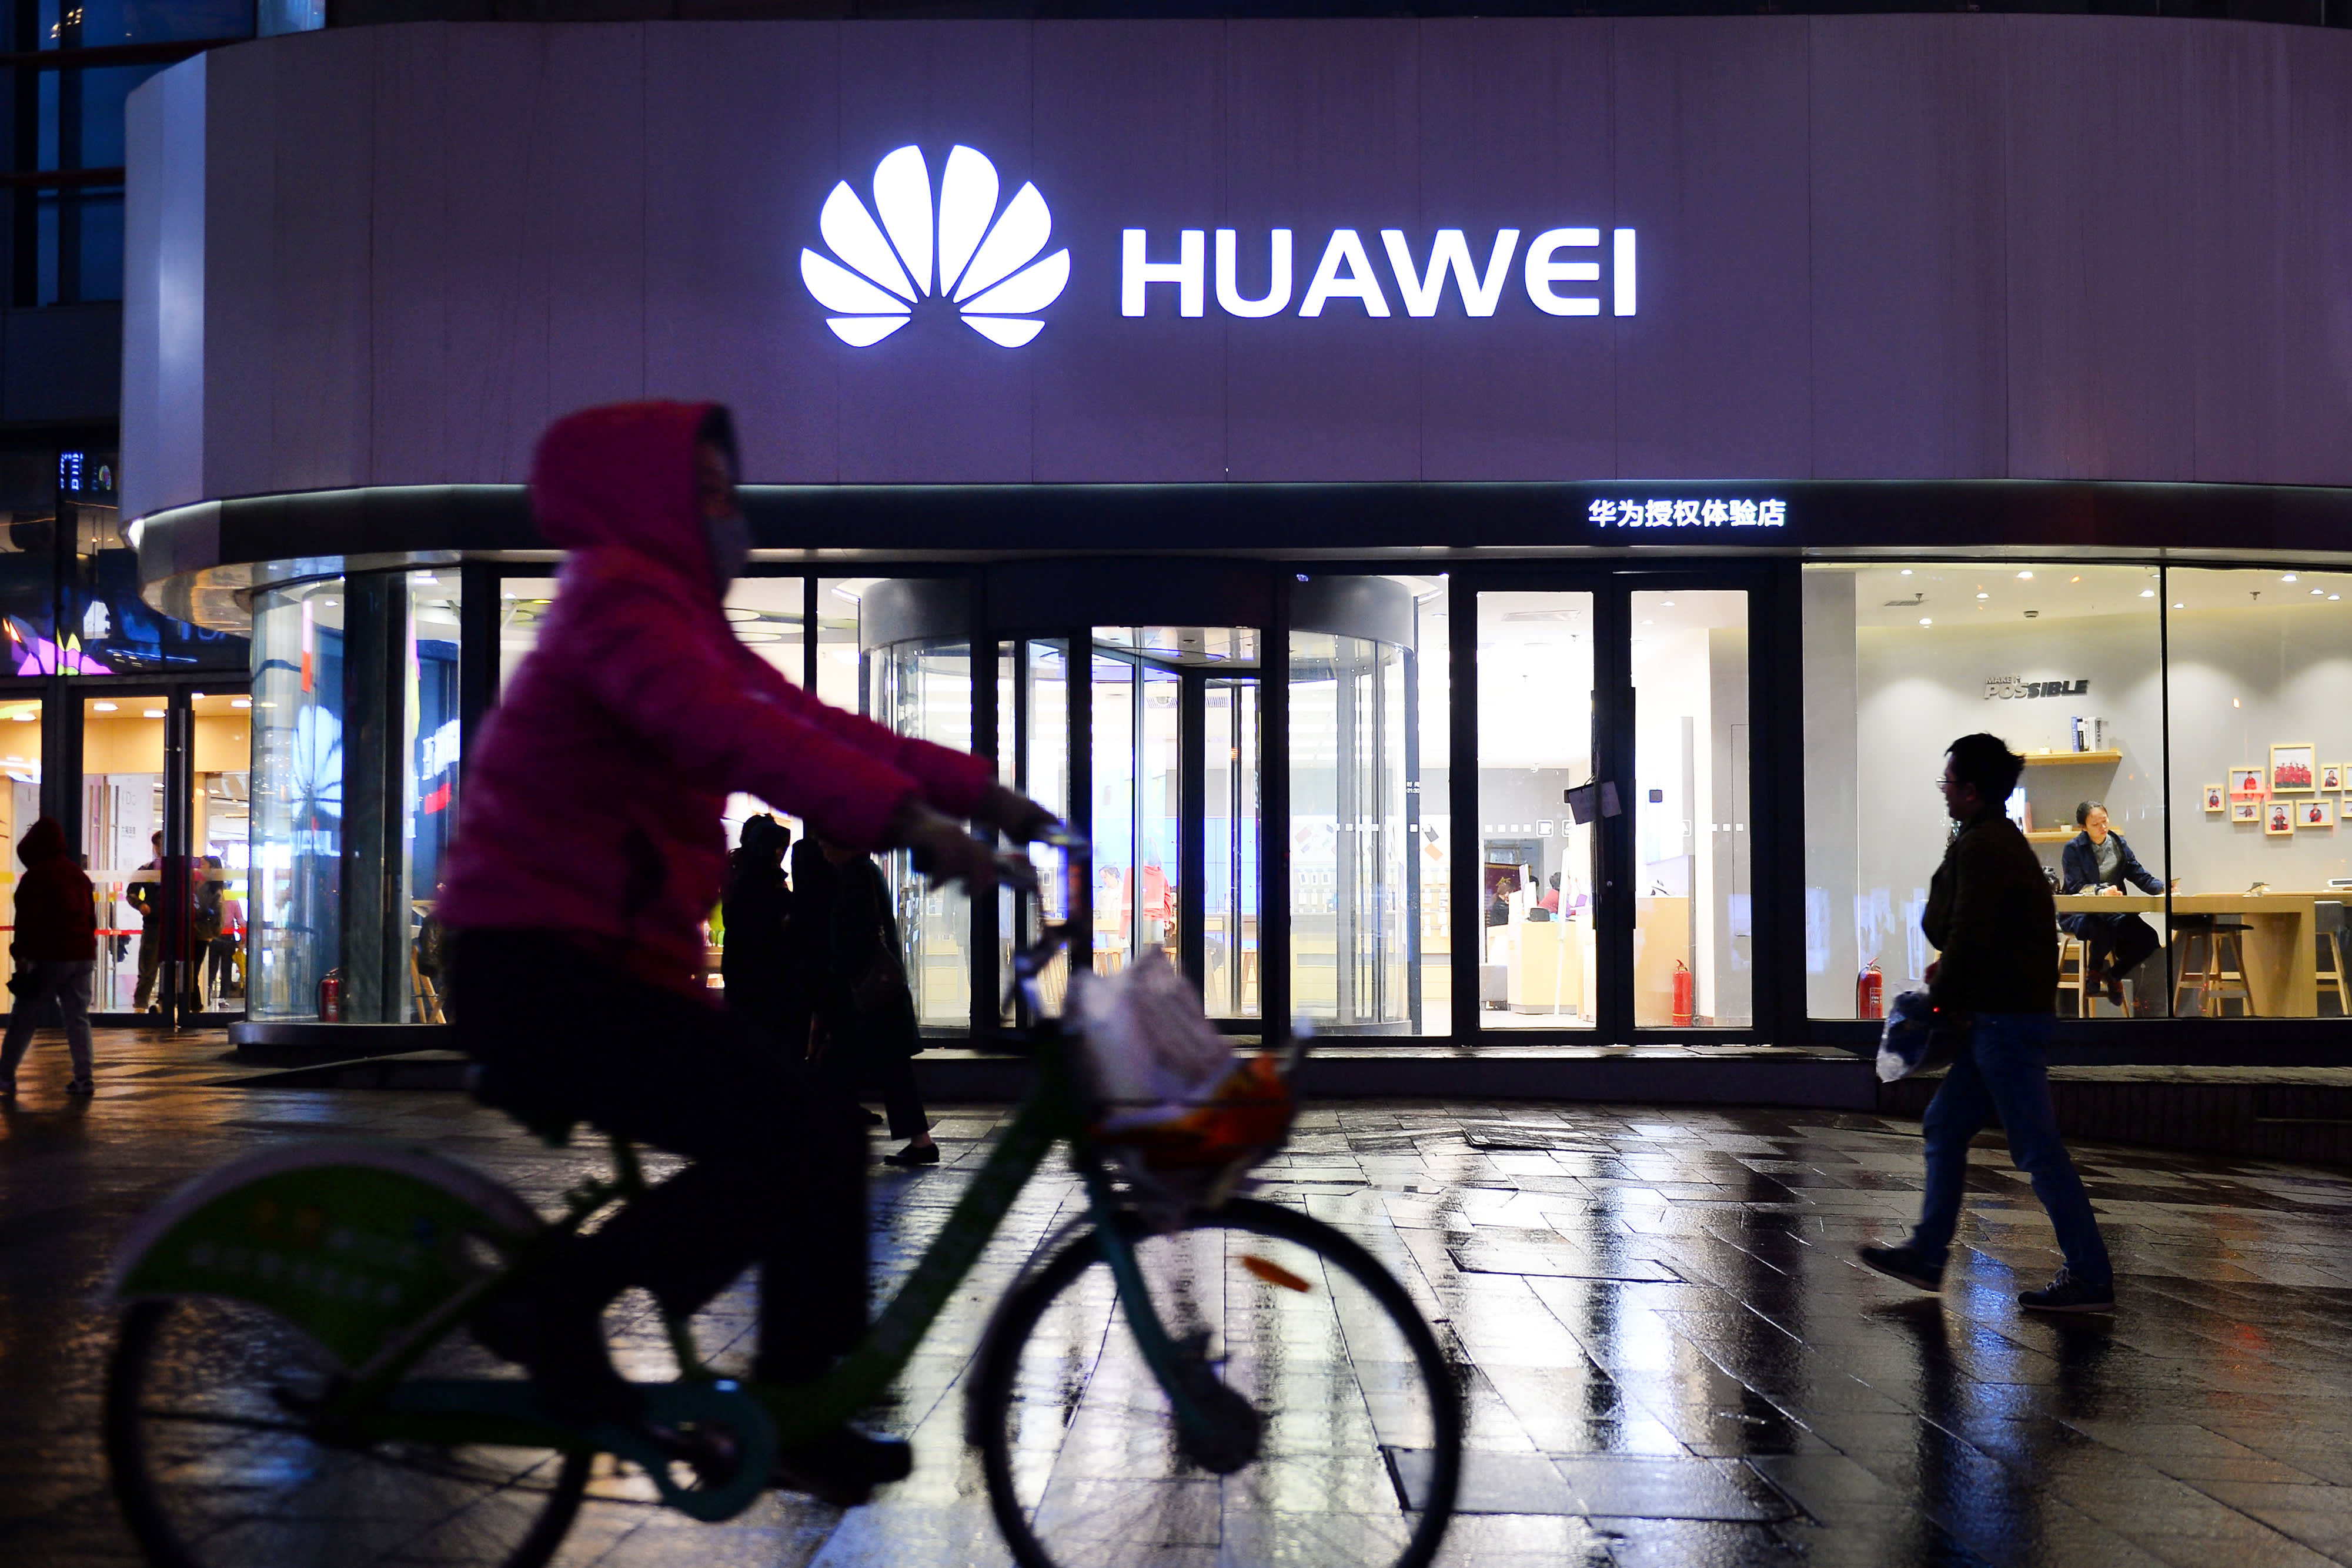 Huawei has reportedly been working on its Android rival for seven years